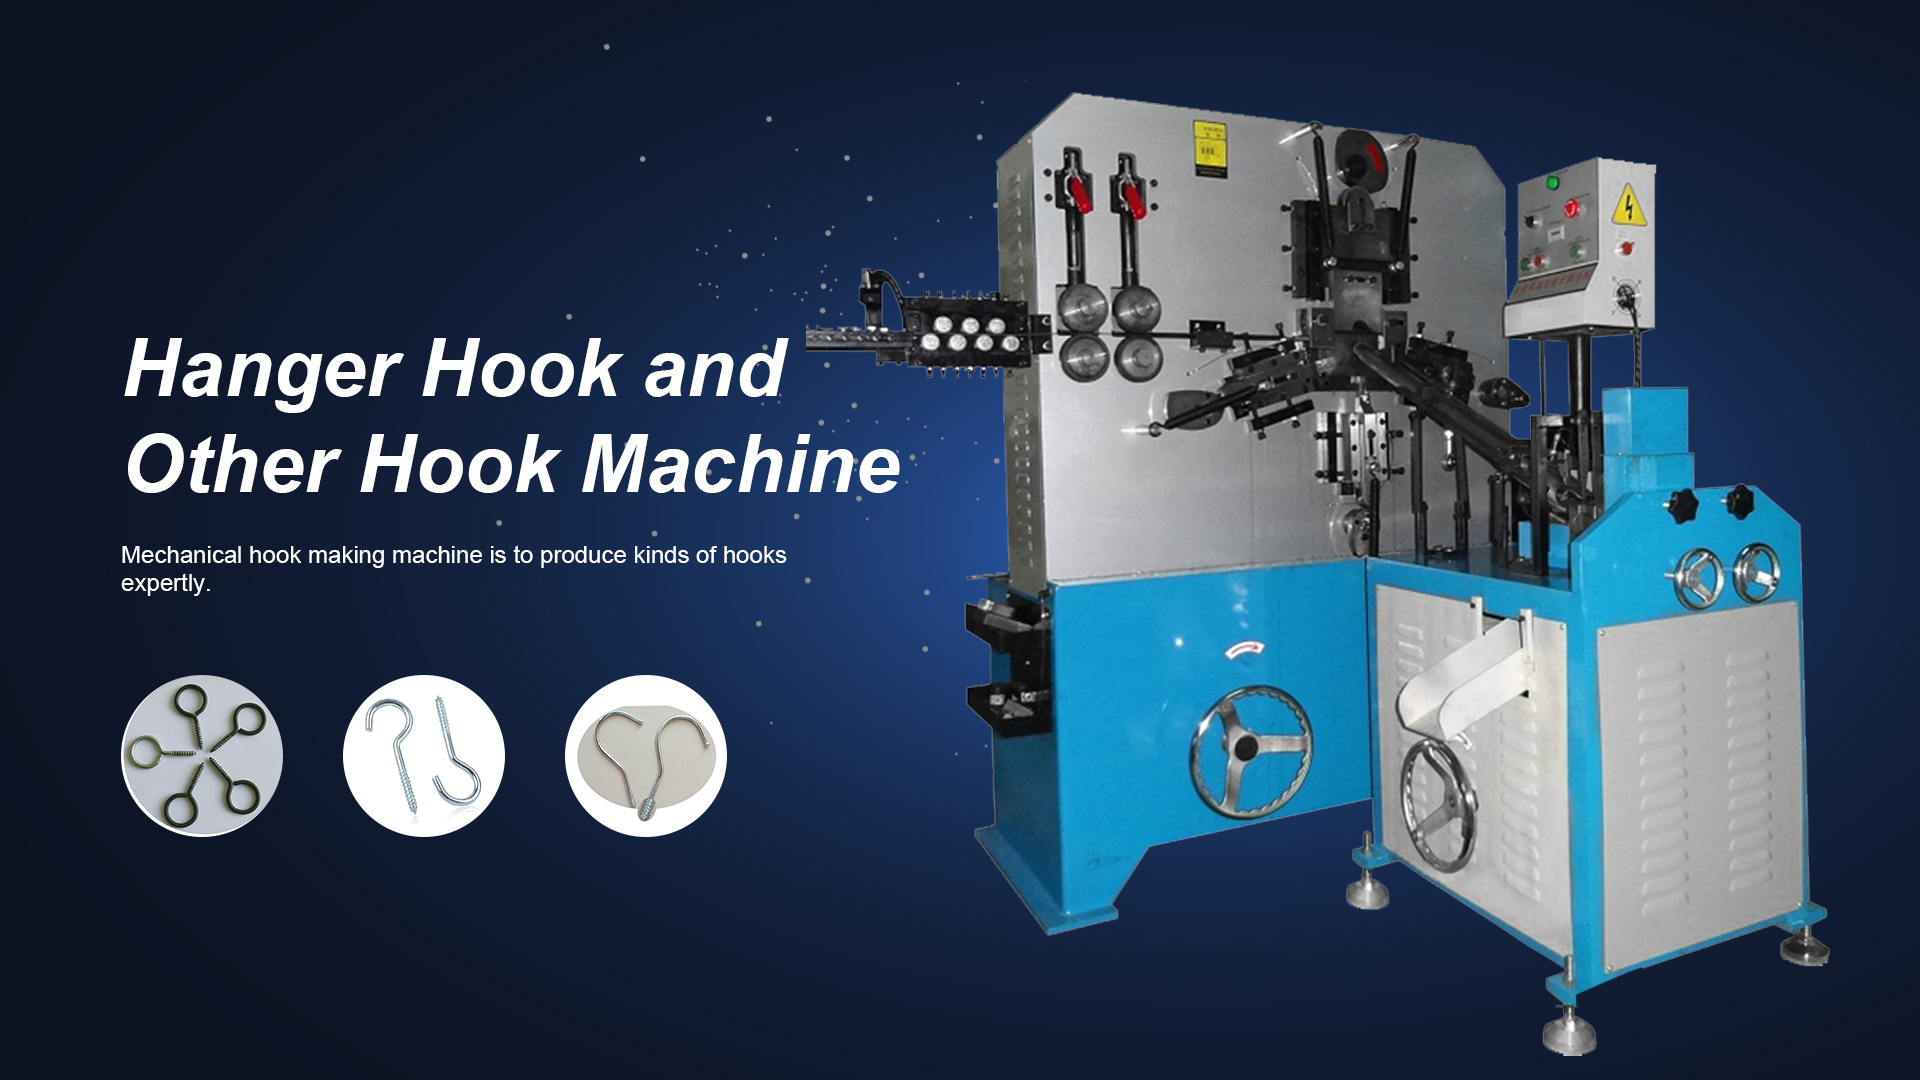 Hanger Hook and Other Hook Machine